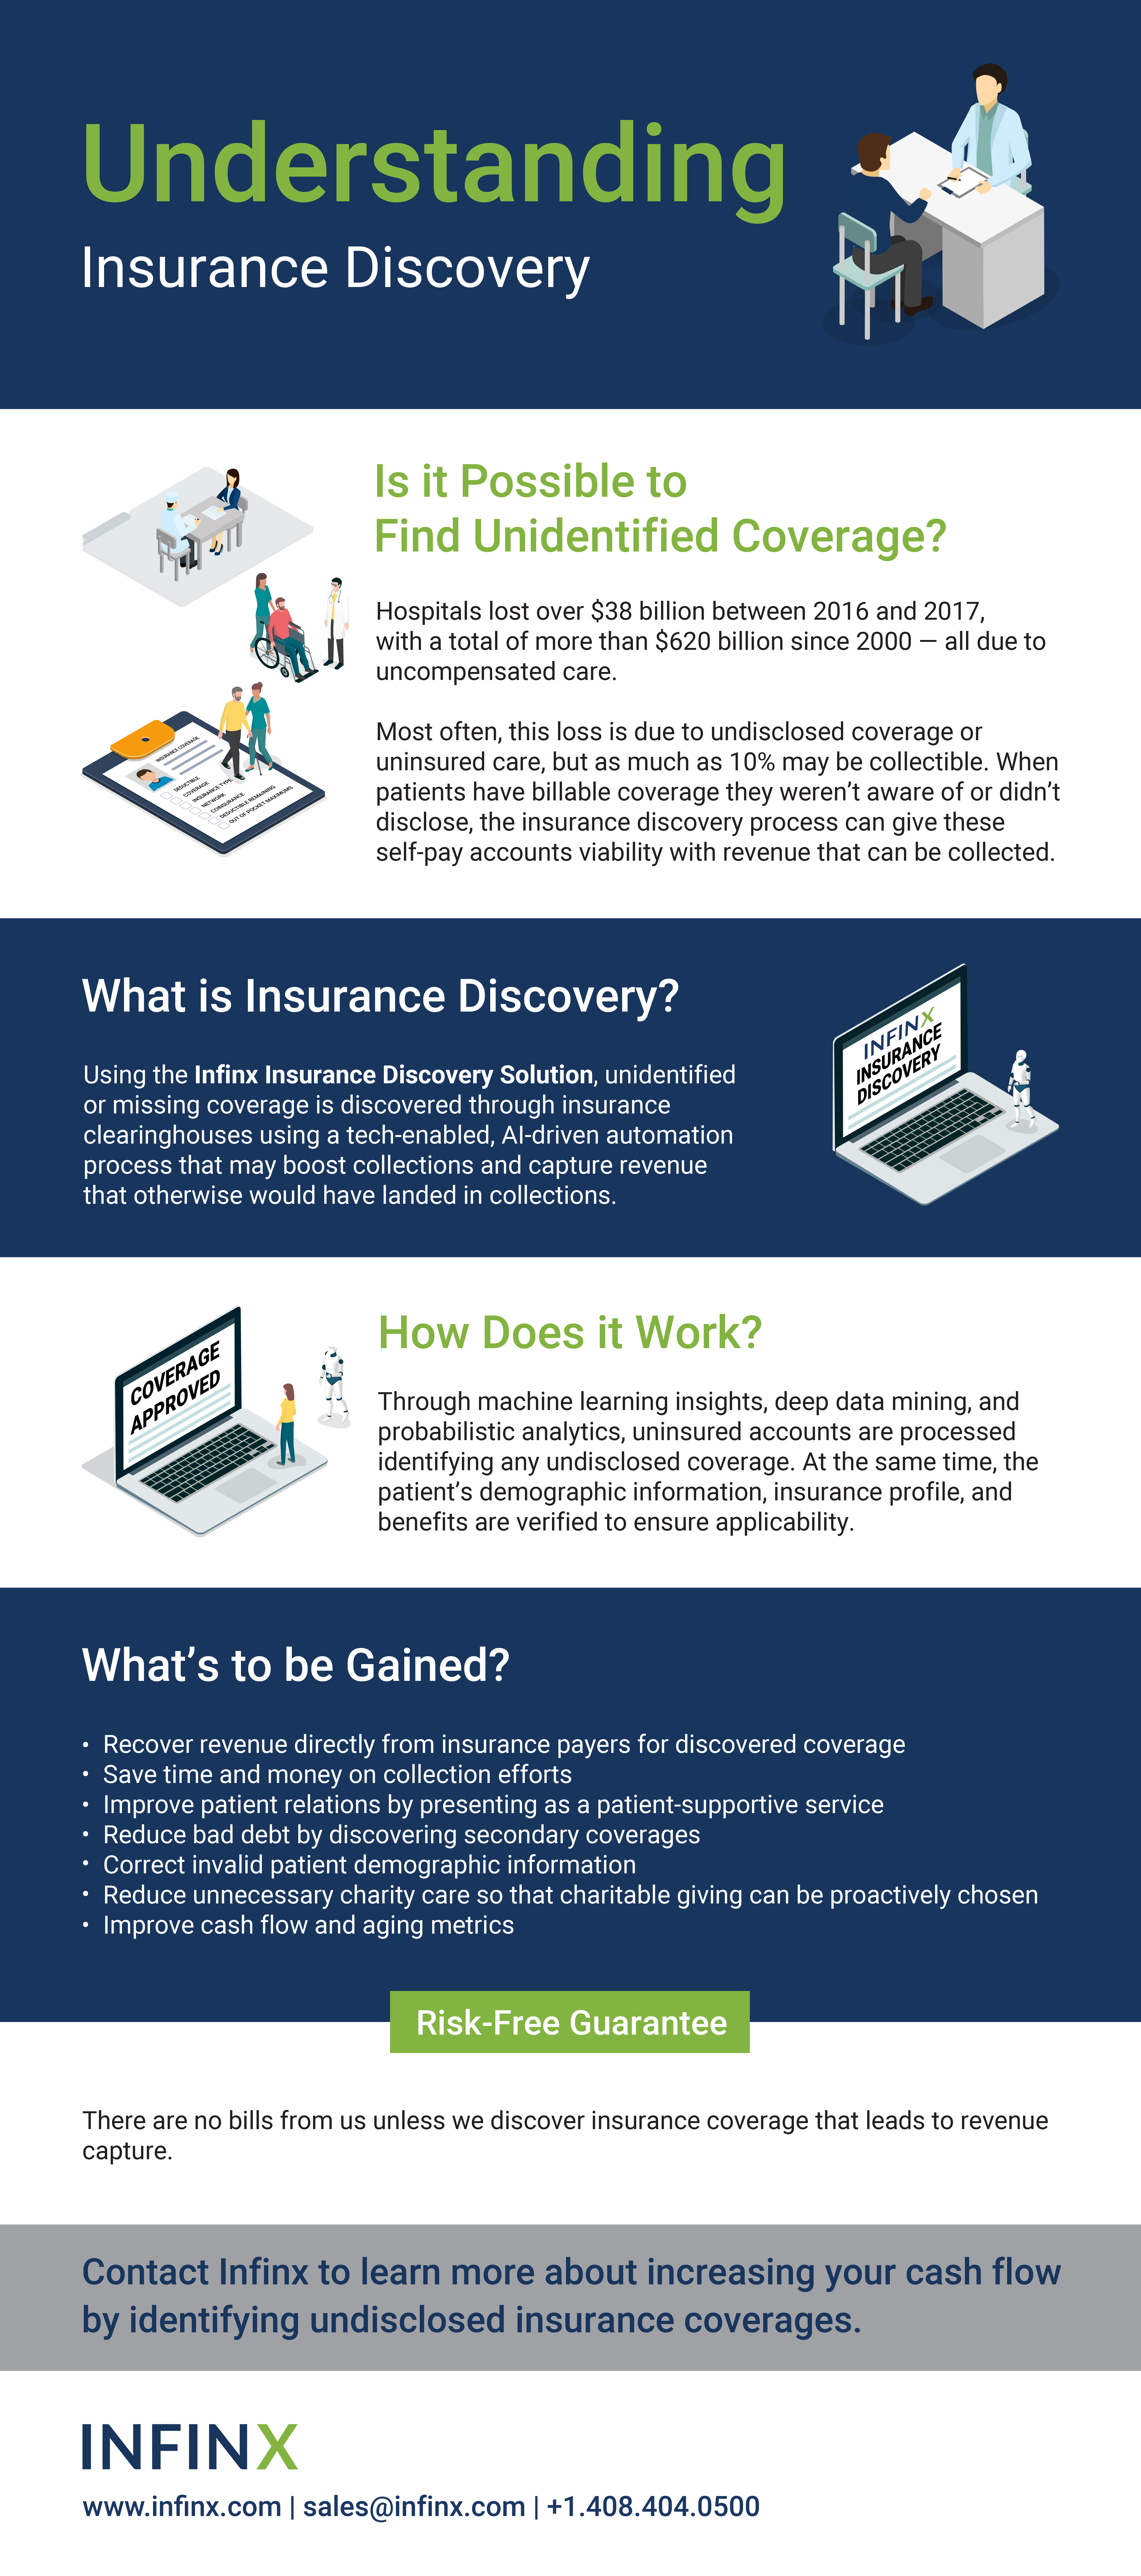 Infinx - Infographic - Insurance Discovery - June 2020